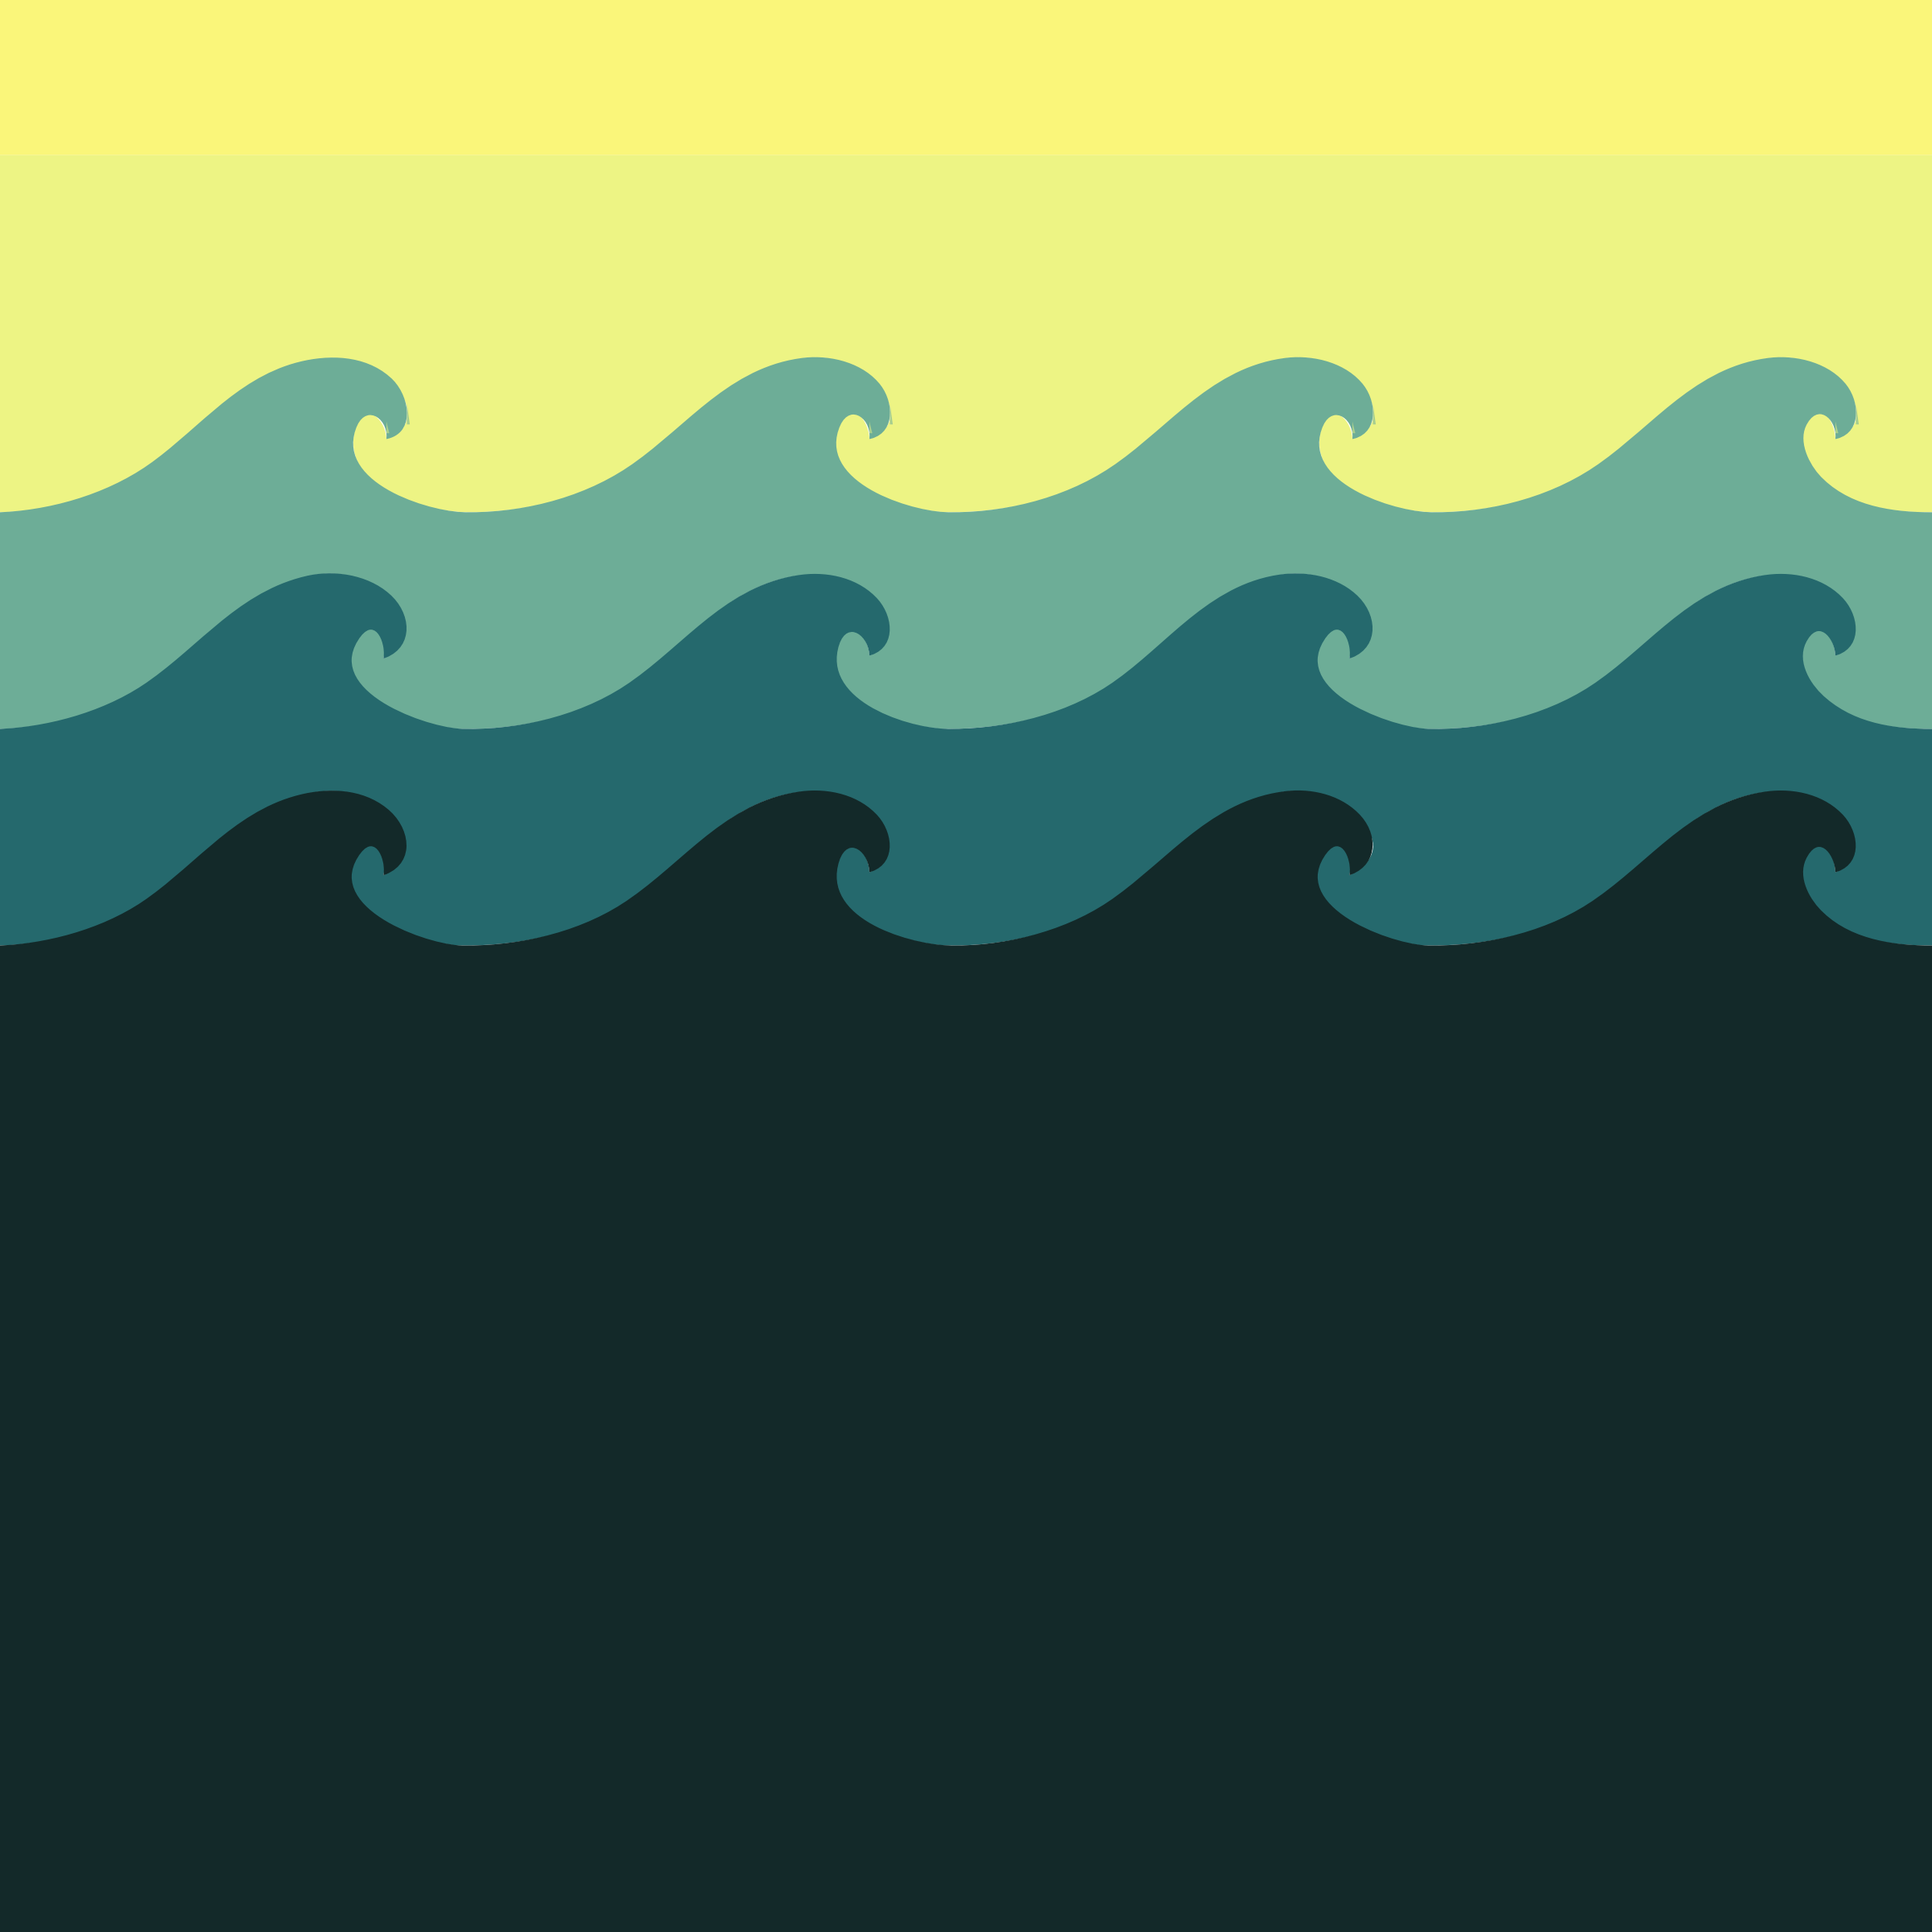 Free cliparts download clip. Waves clipart wave pattern wave